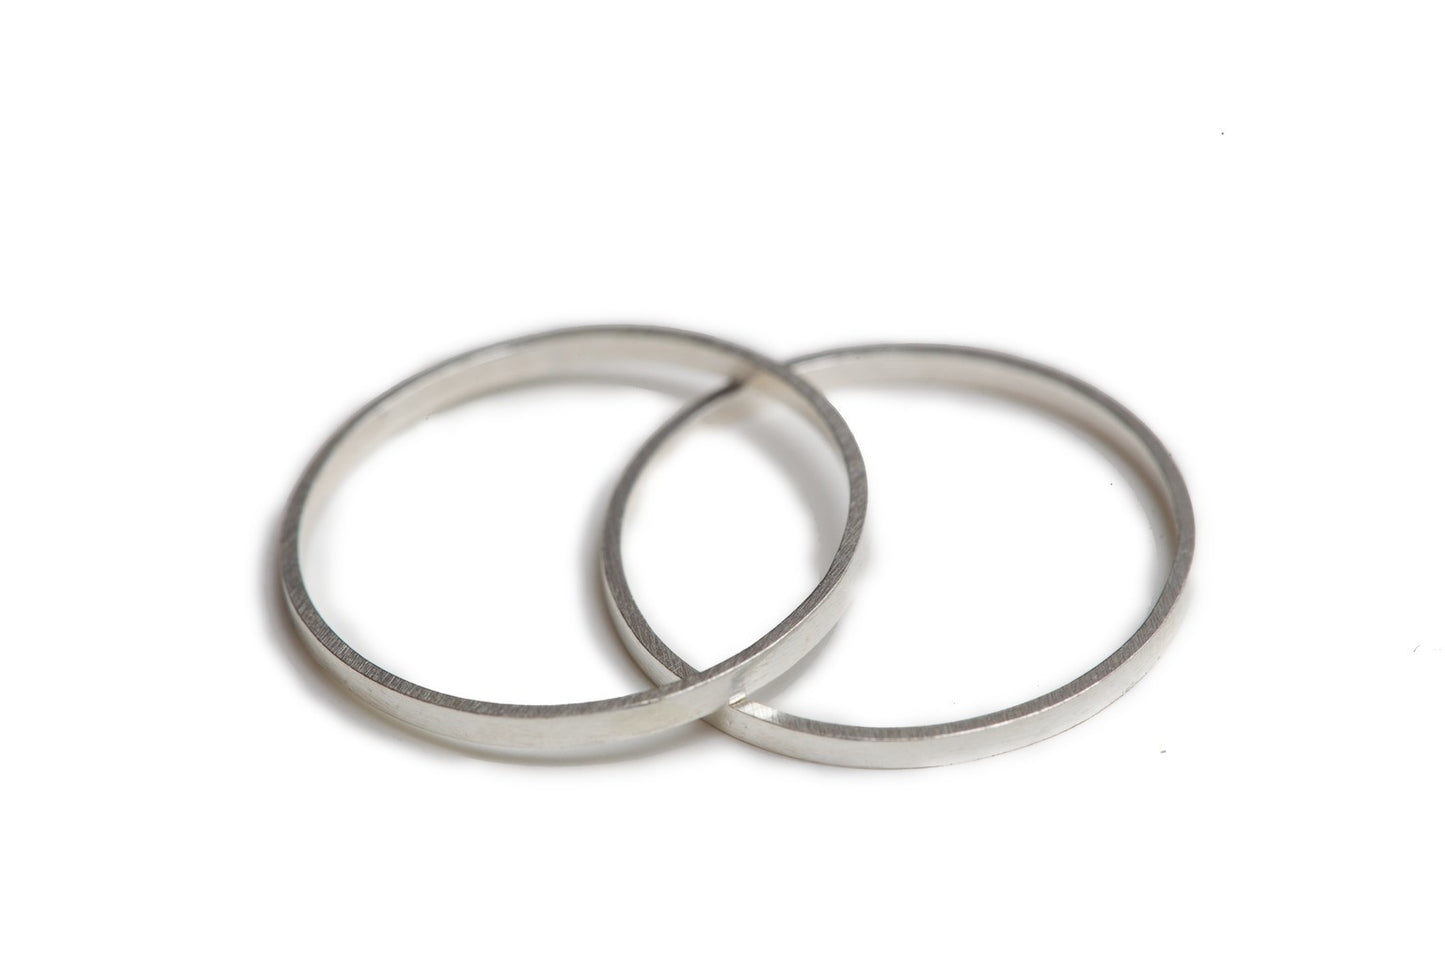 Stackable Midi Rings - Set of 2